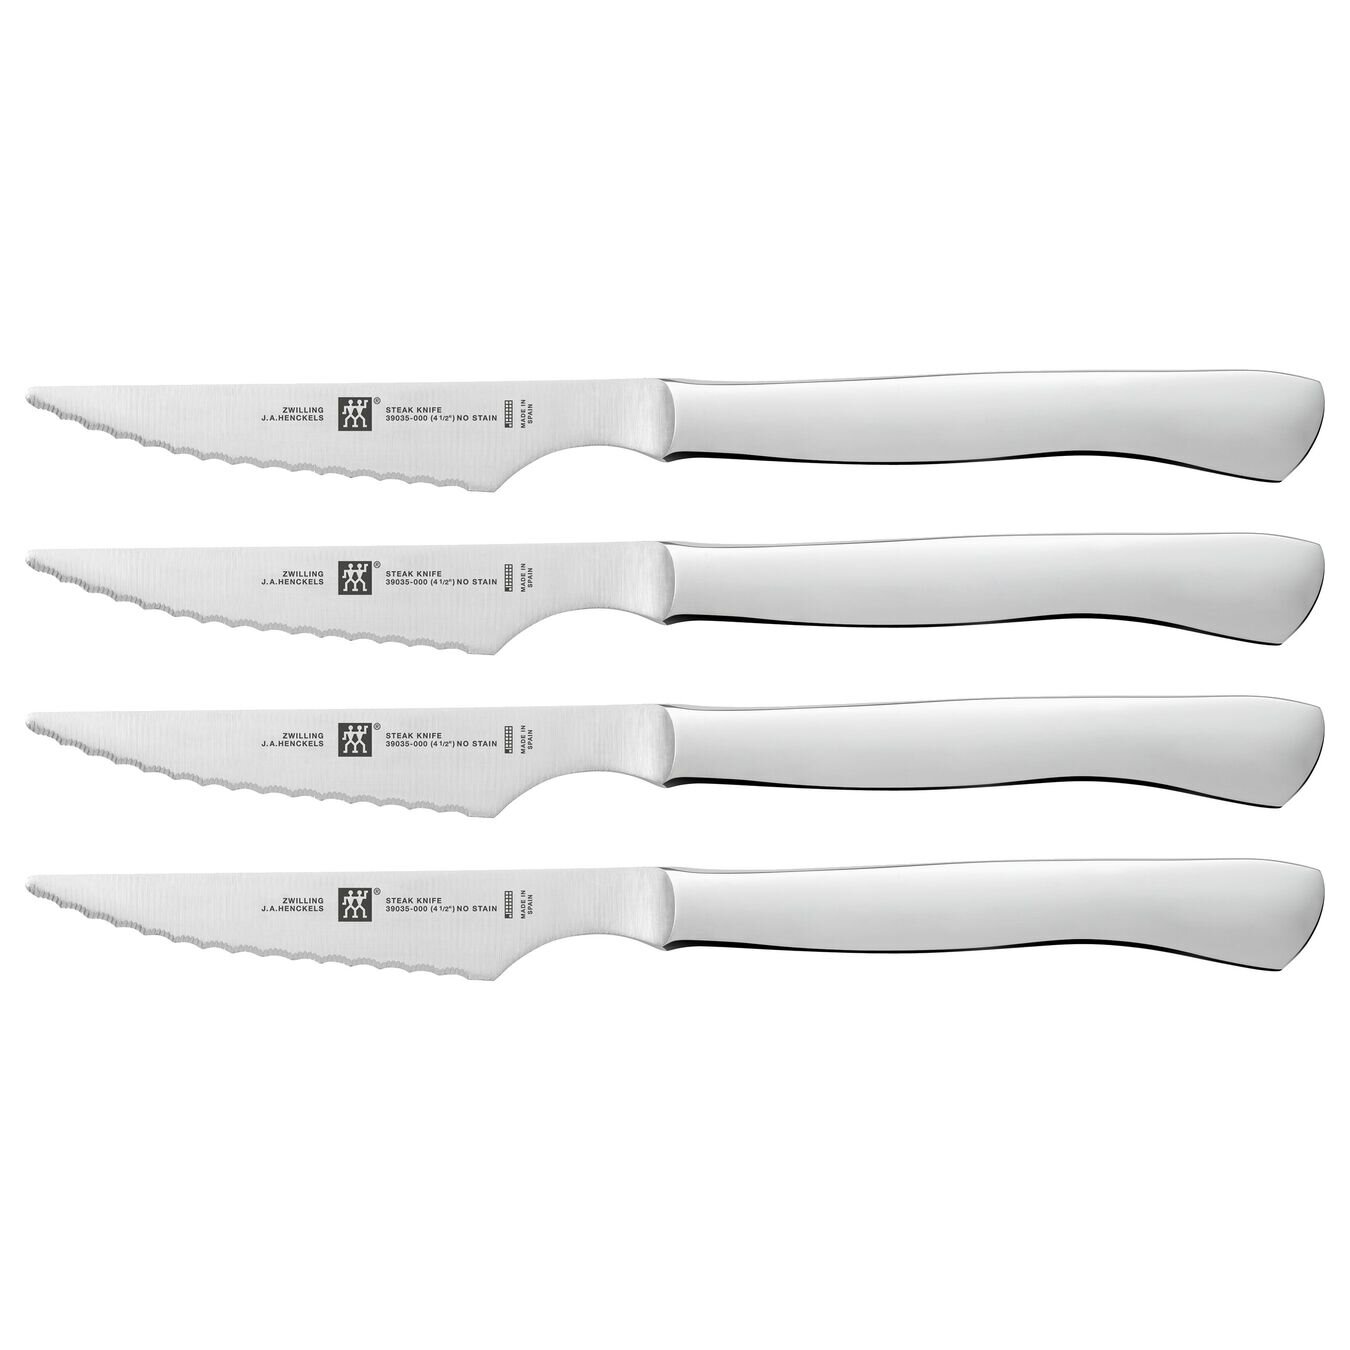  ZWILLING Steak Dinner 12-Piece Set includes forks and steak  knives, Gift Set, with Presentation Box: Home & Kitchen